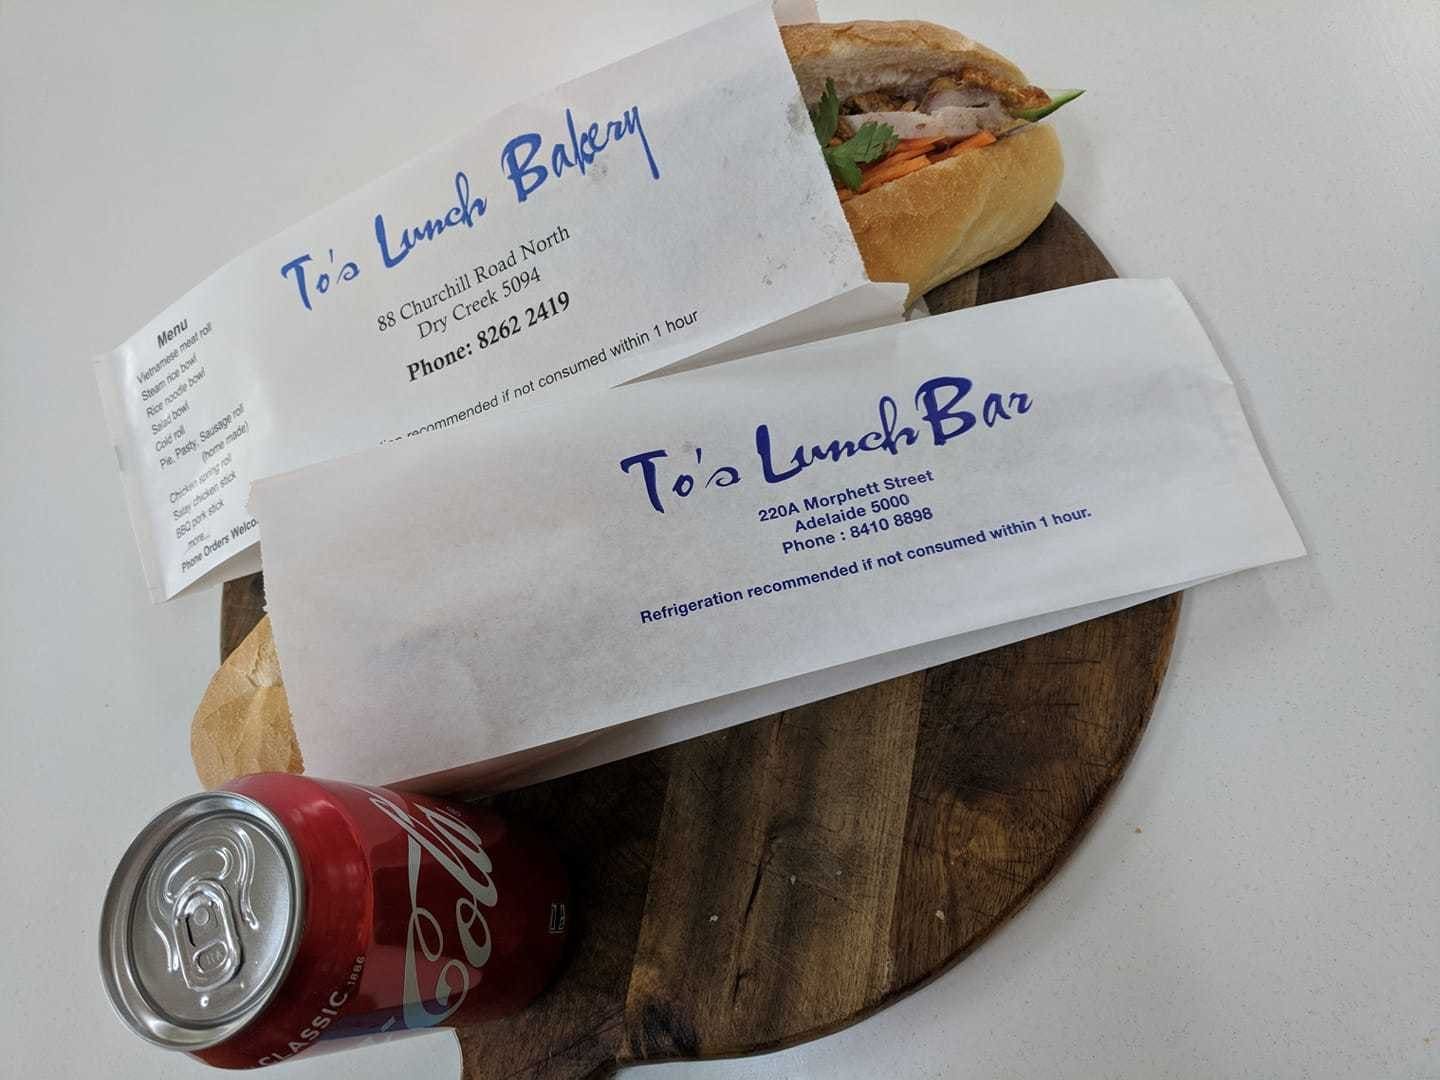 To's Lunch Bakery